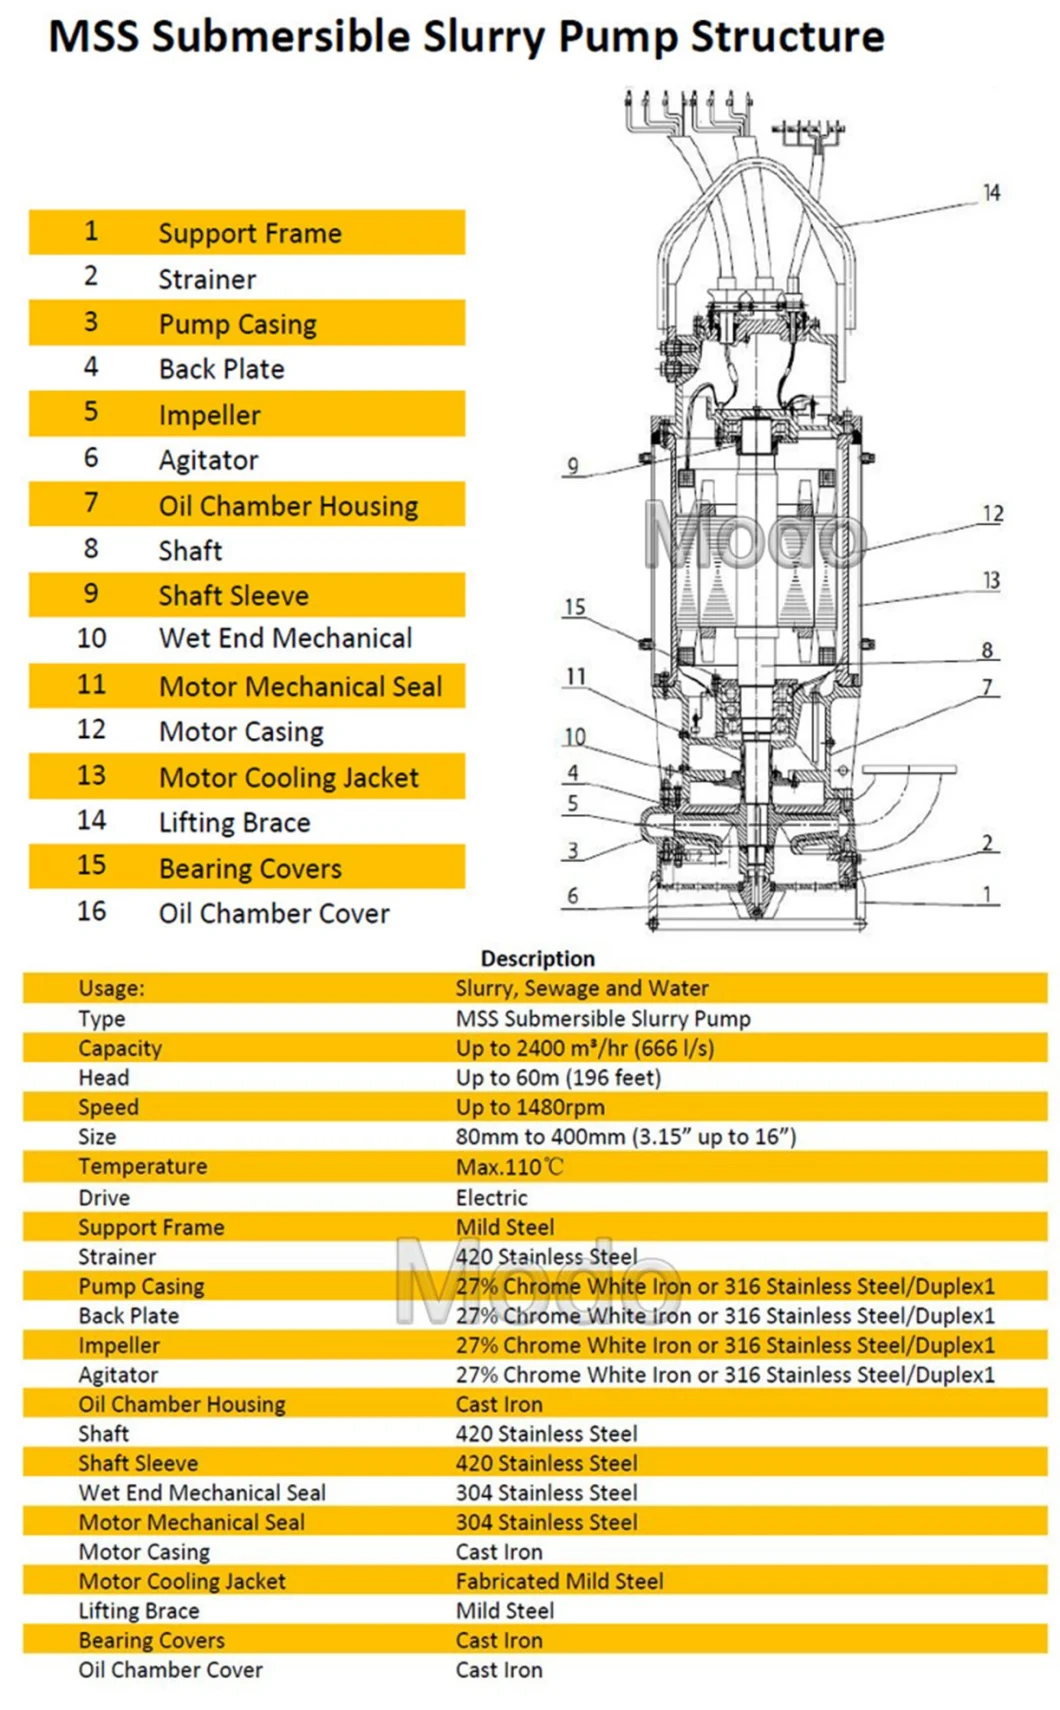 Powerful Vertical Lime Submersible High Pressure Solid Diesel Slurry Pump Submerged for Heavy Duty